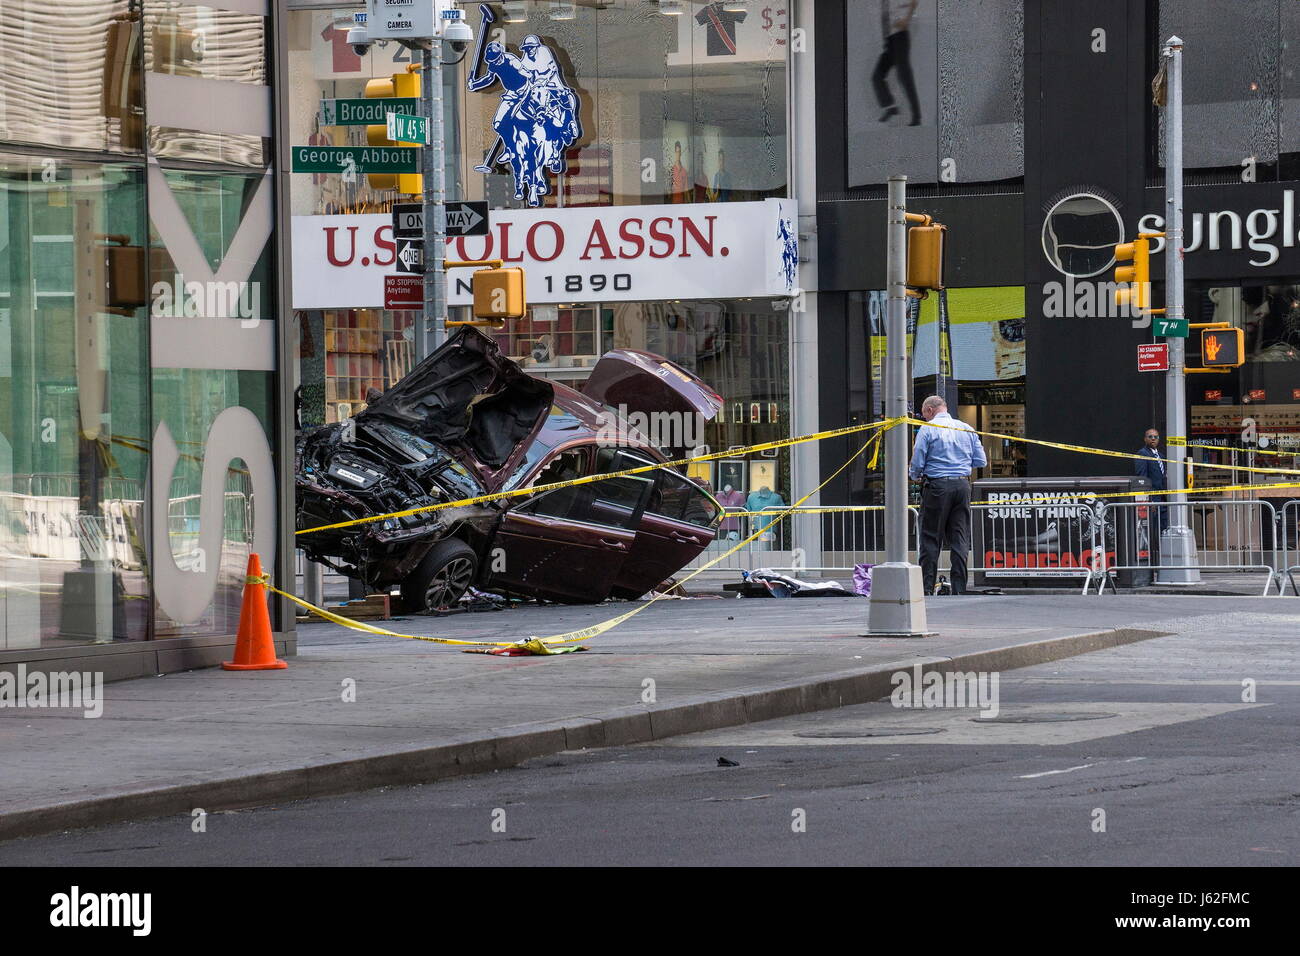 New York, New York, USA. 18th May, 2017. Police officers investigate the scene of a car crash in Times Square that took the life of an 18 year-old Michigan girl and injured 22 others. Credit: Kevin C. Downs/ZUMA Wire/ZUMAPRESS.com/Alamy Live News Stock Photo